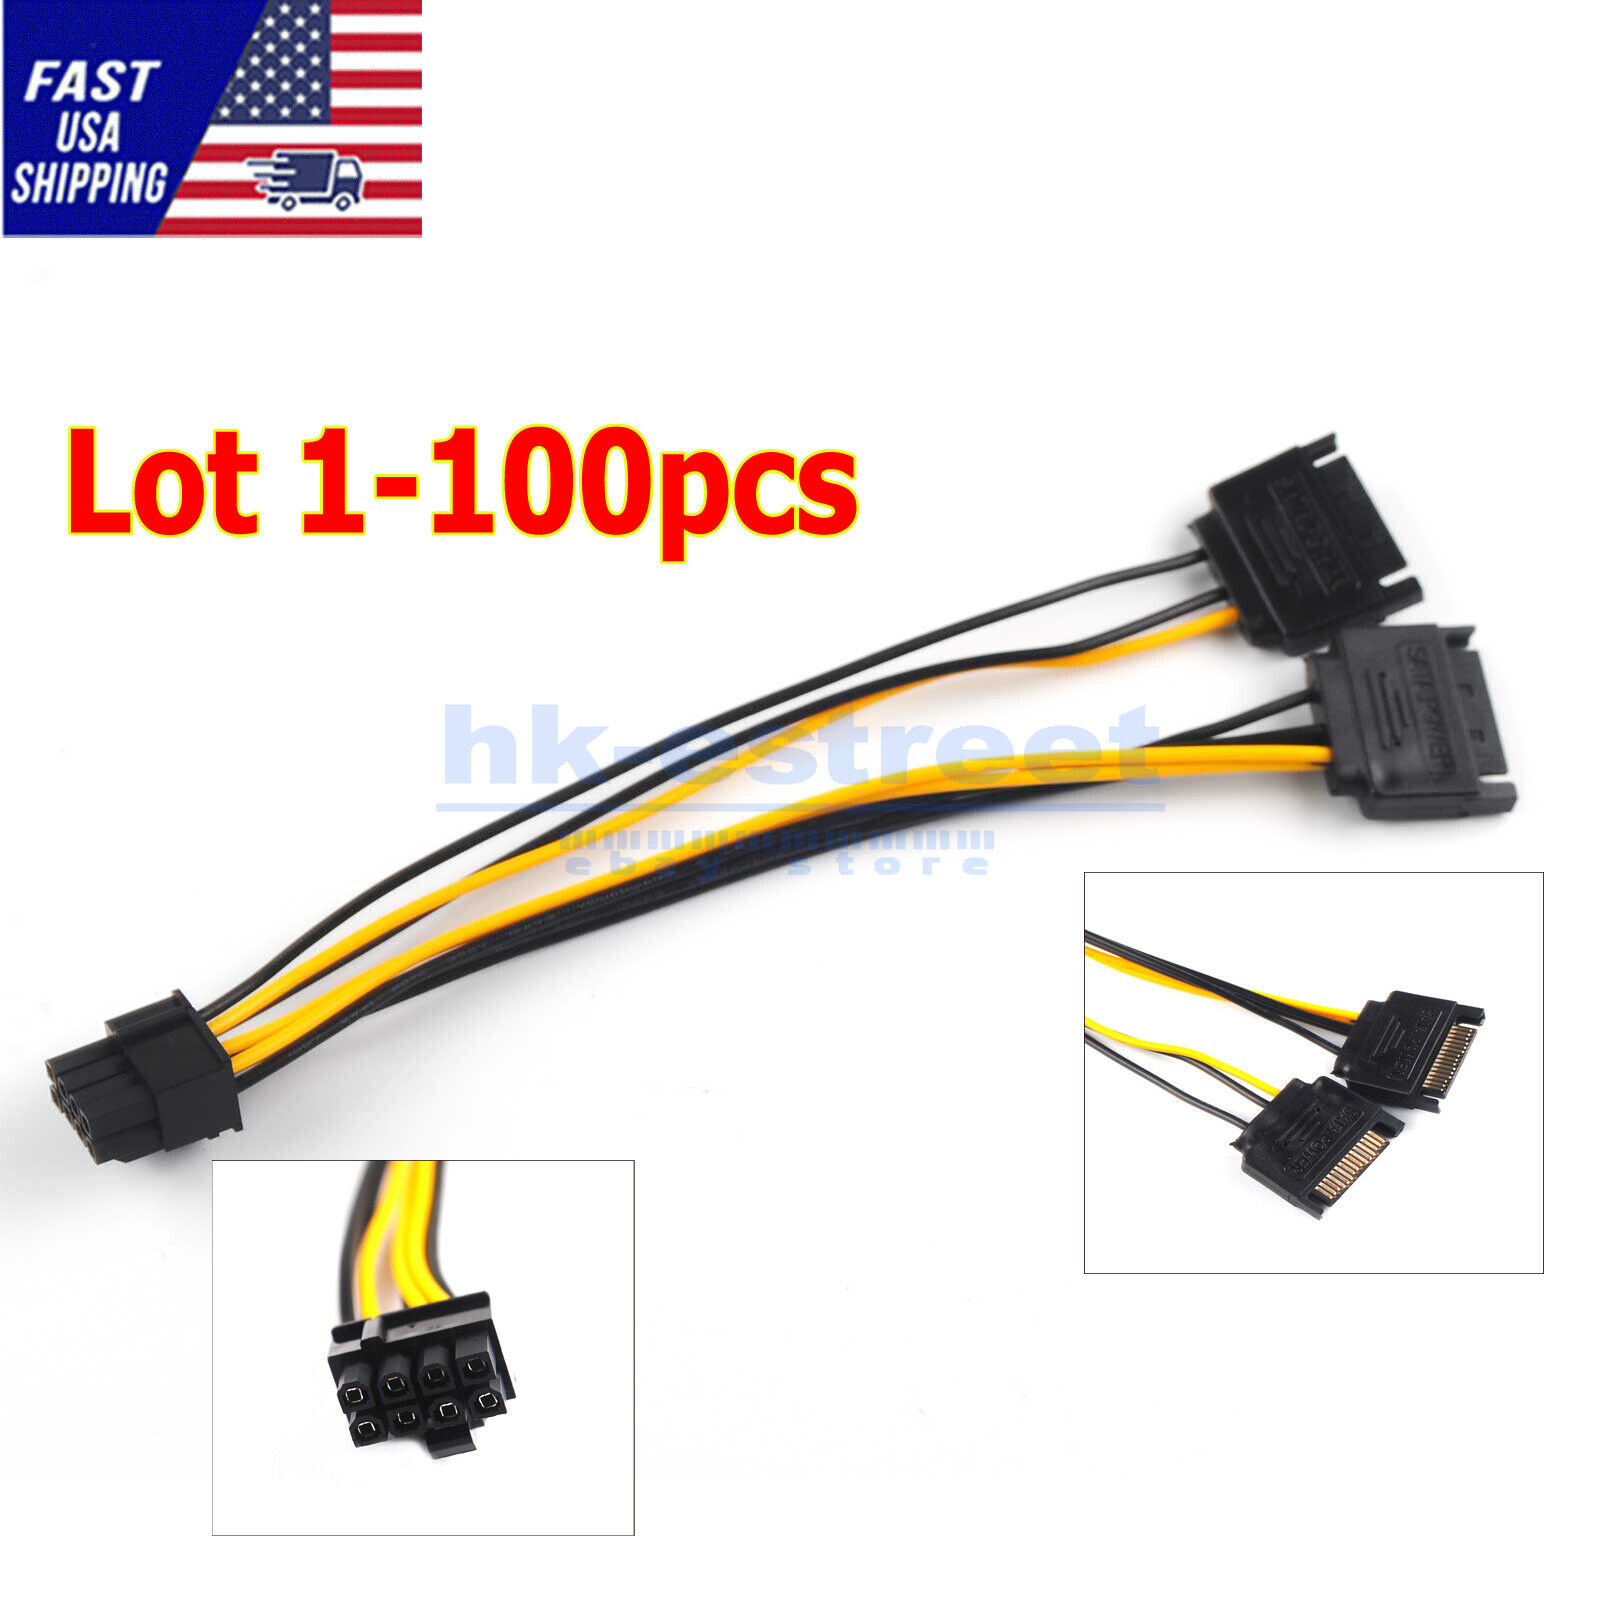 Lot 1-100pcs Dual 15Pin SATA Male To PCIe 8Pin Male Video Card Power Cable 20cm